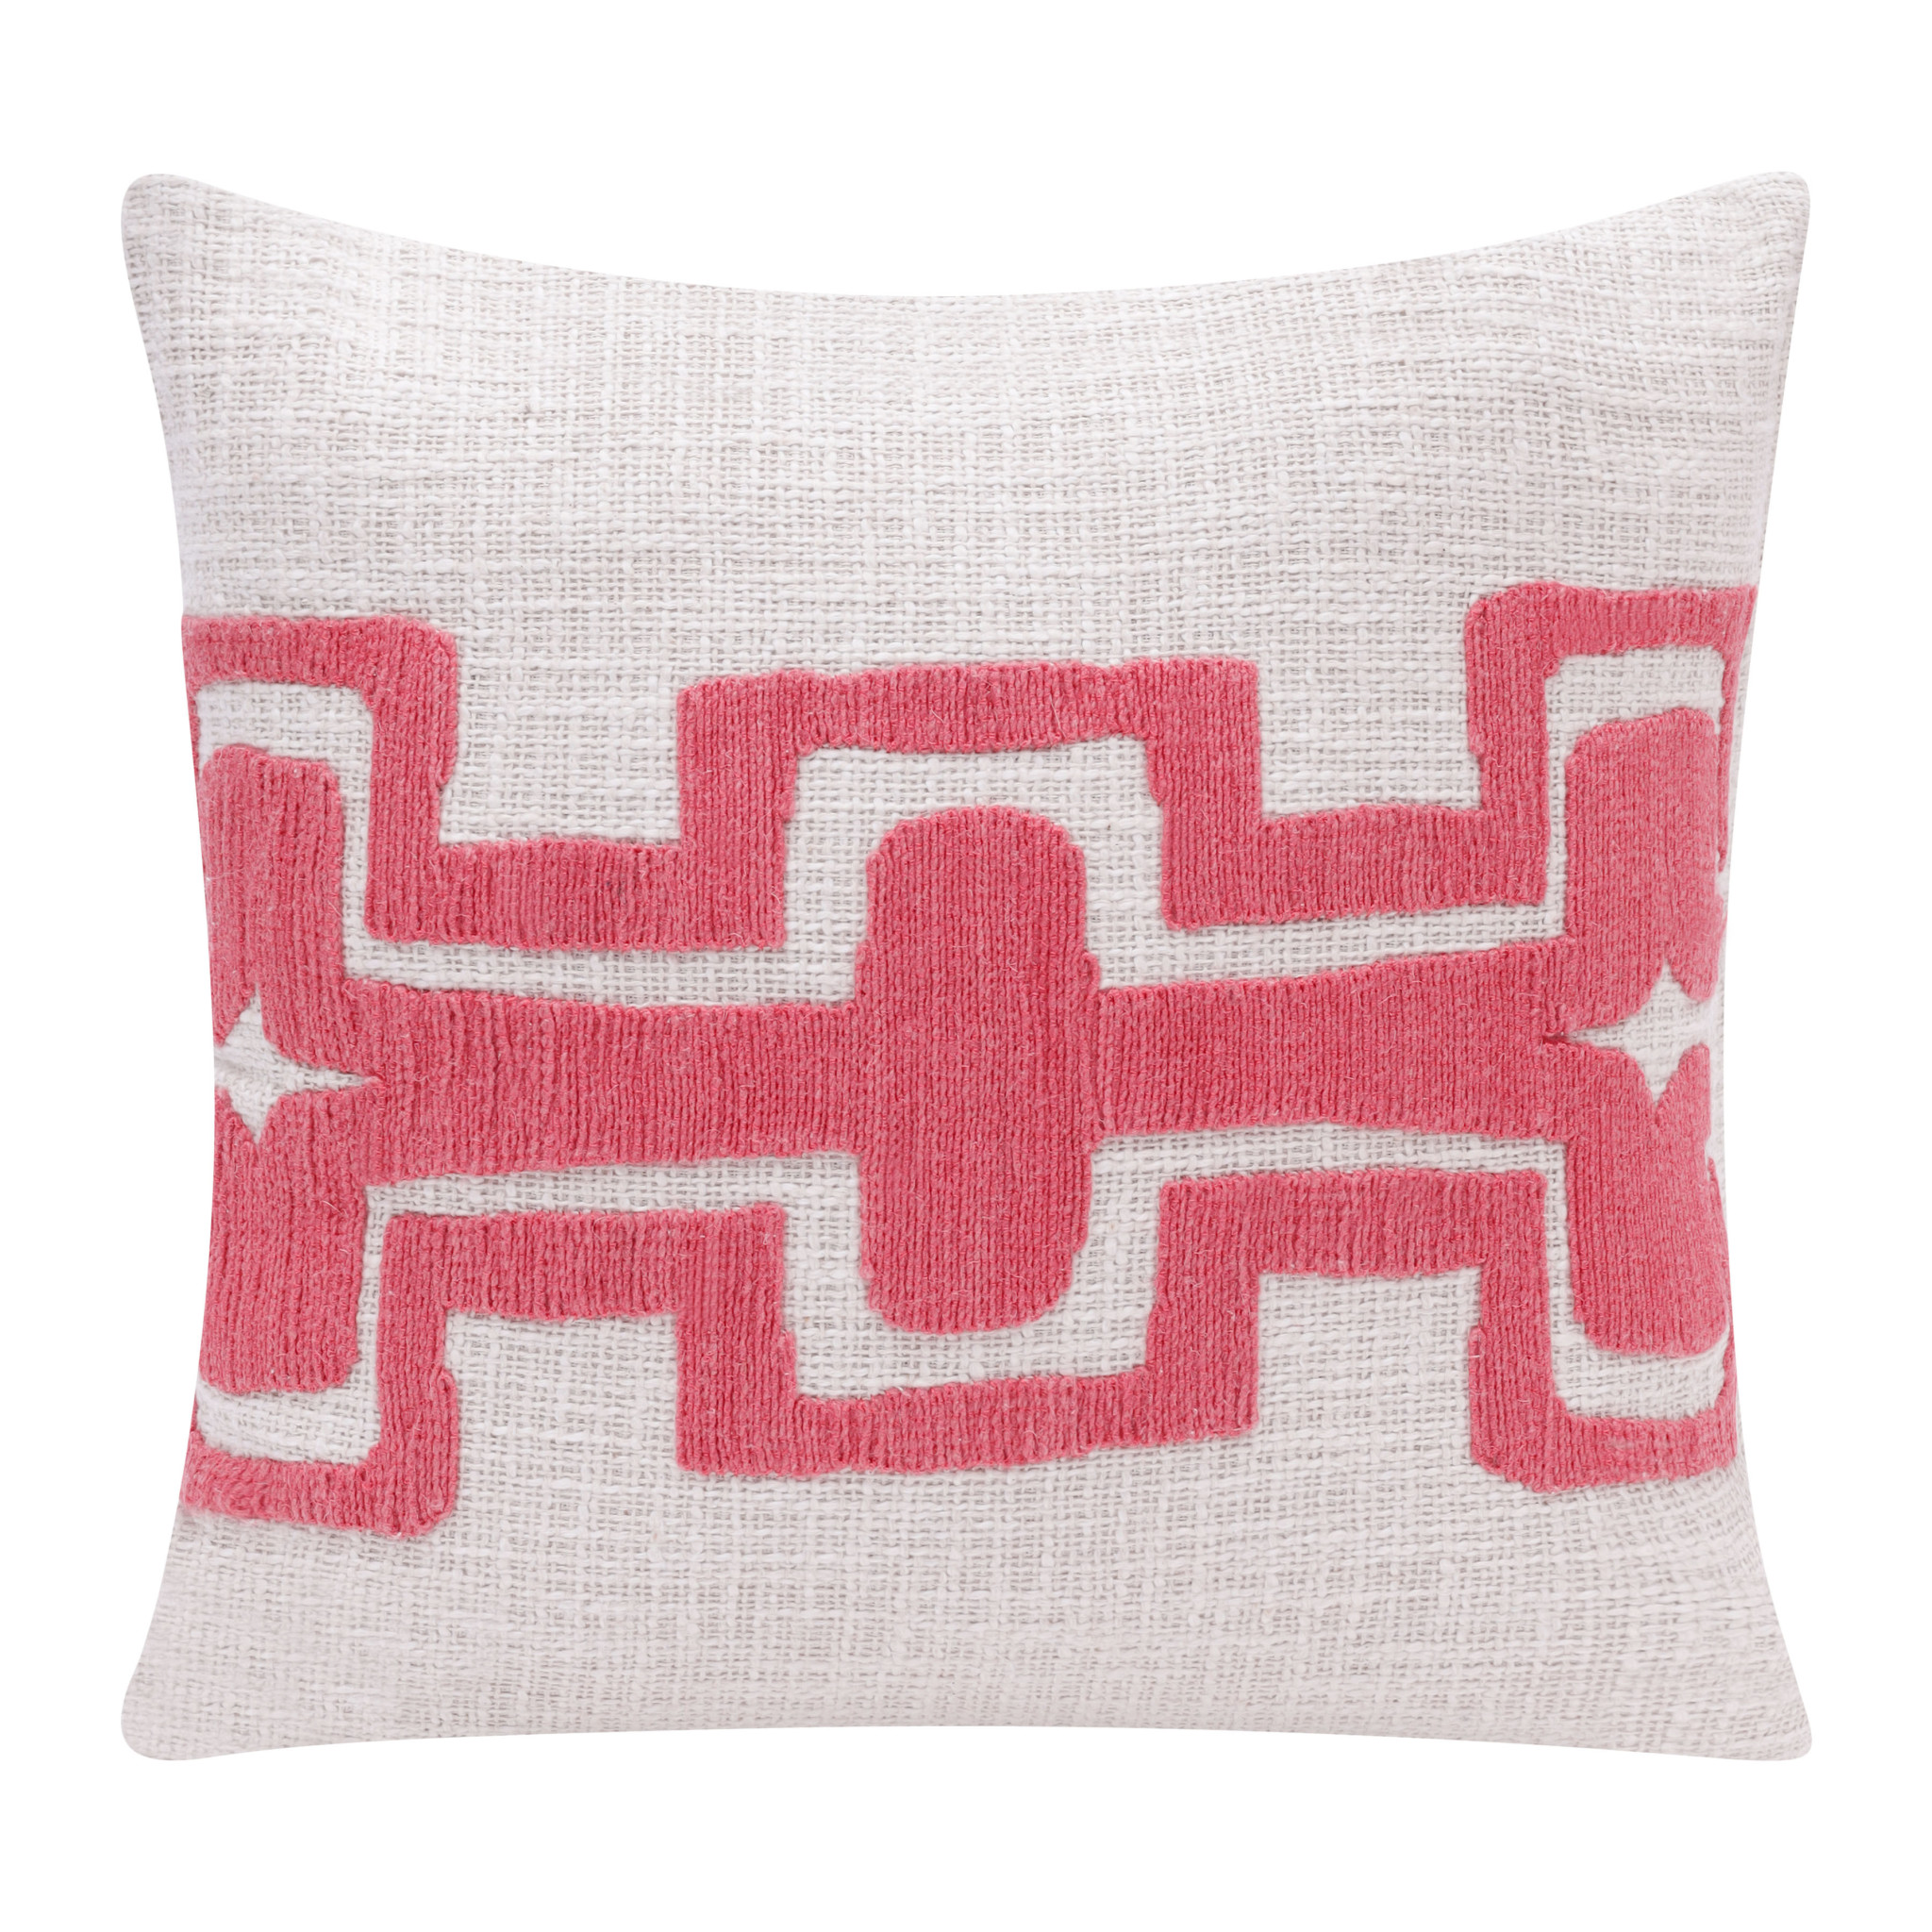 20" X 20" Coral And Ivory 100% Cotton Geometric Zippered Pillow-517067-1